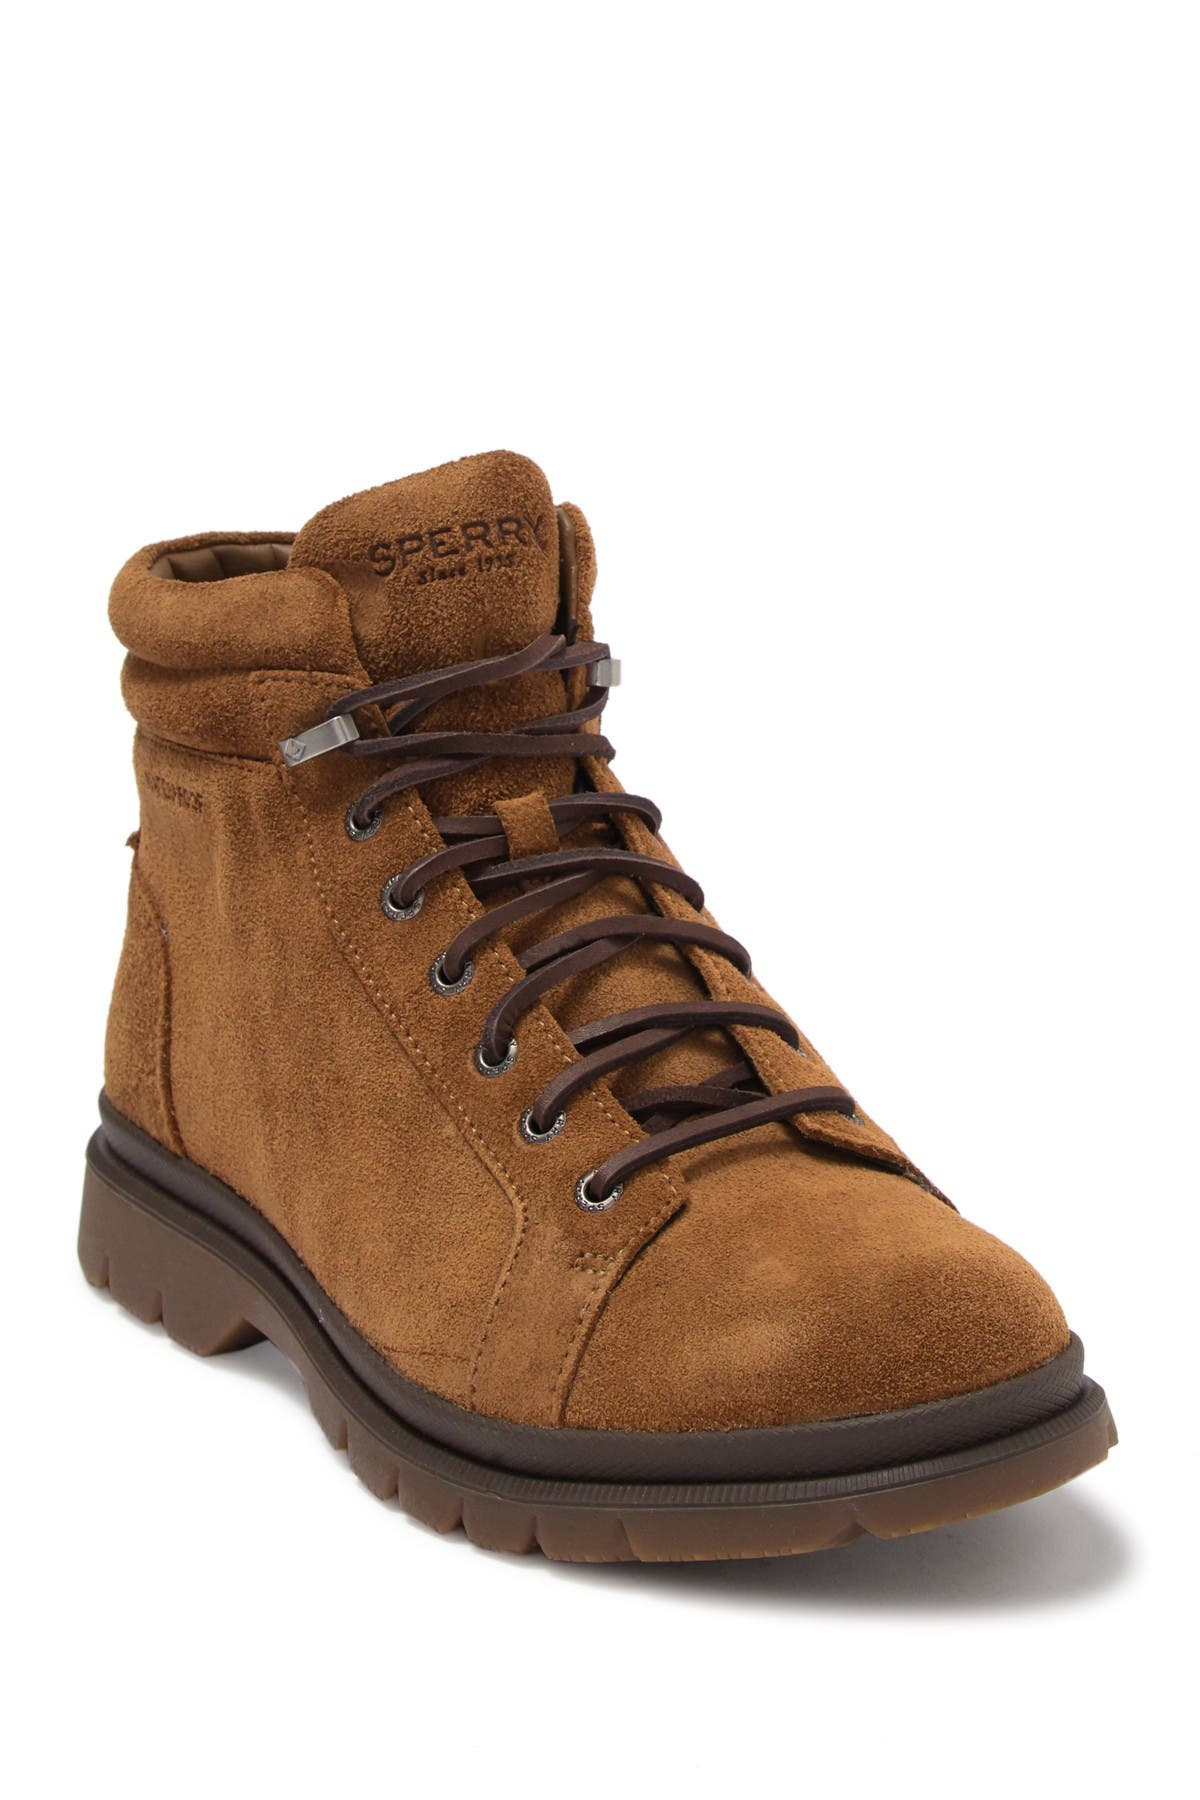 sperry suede boots